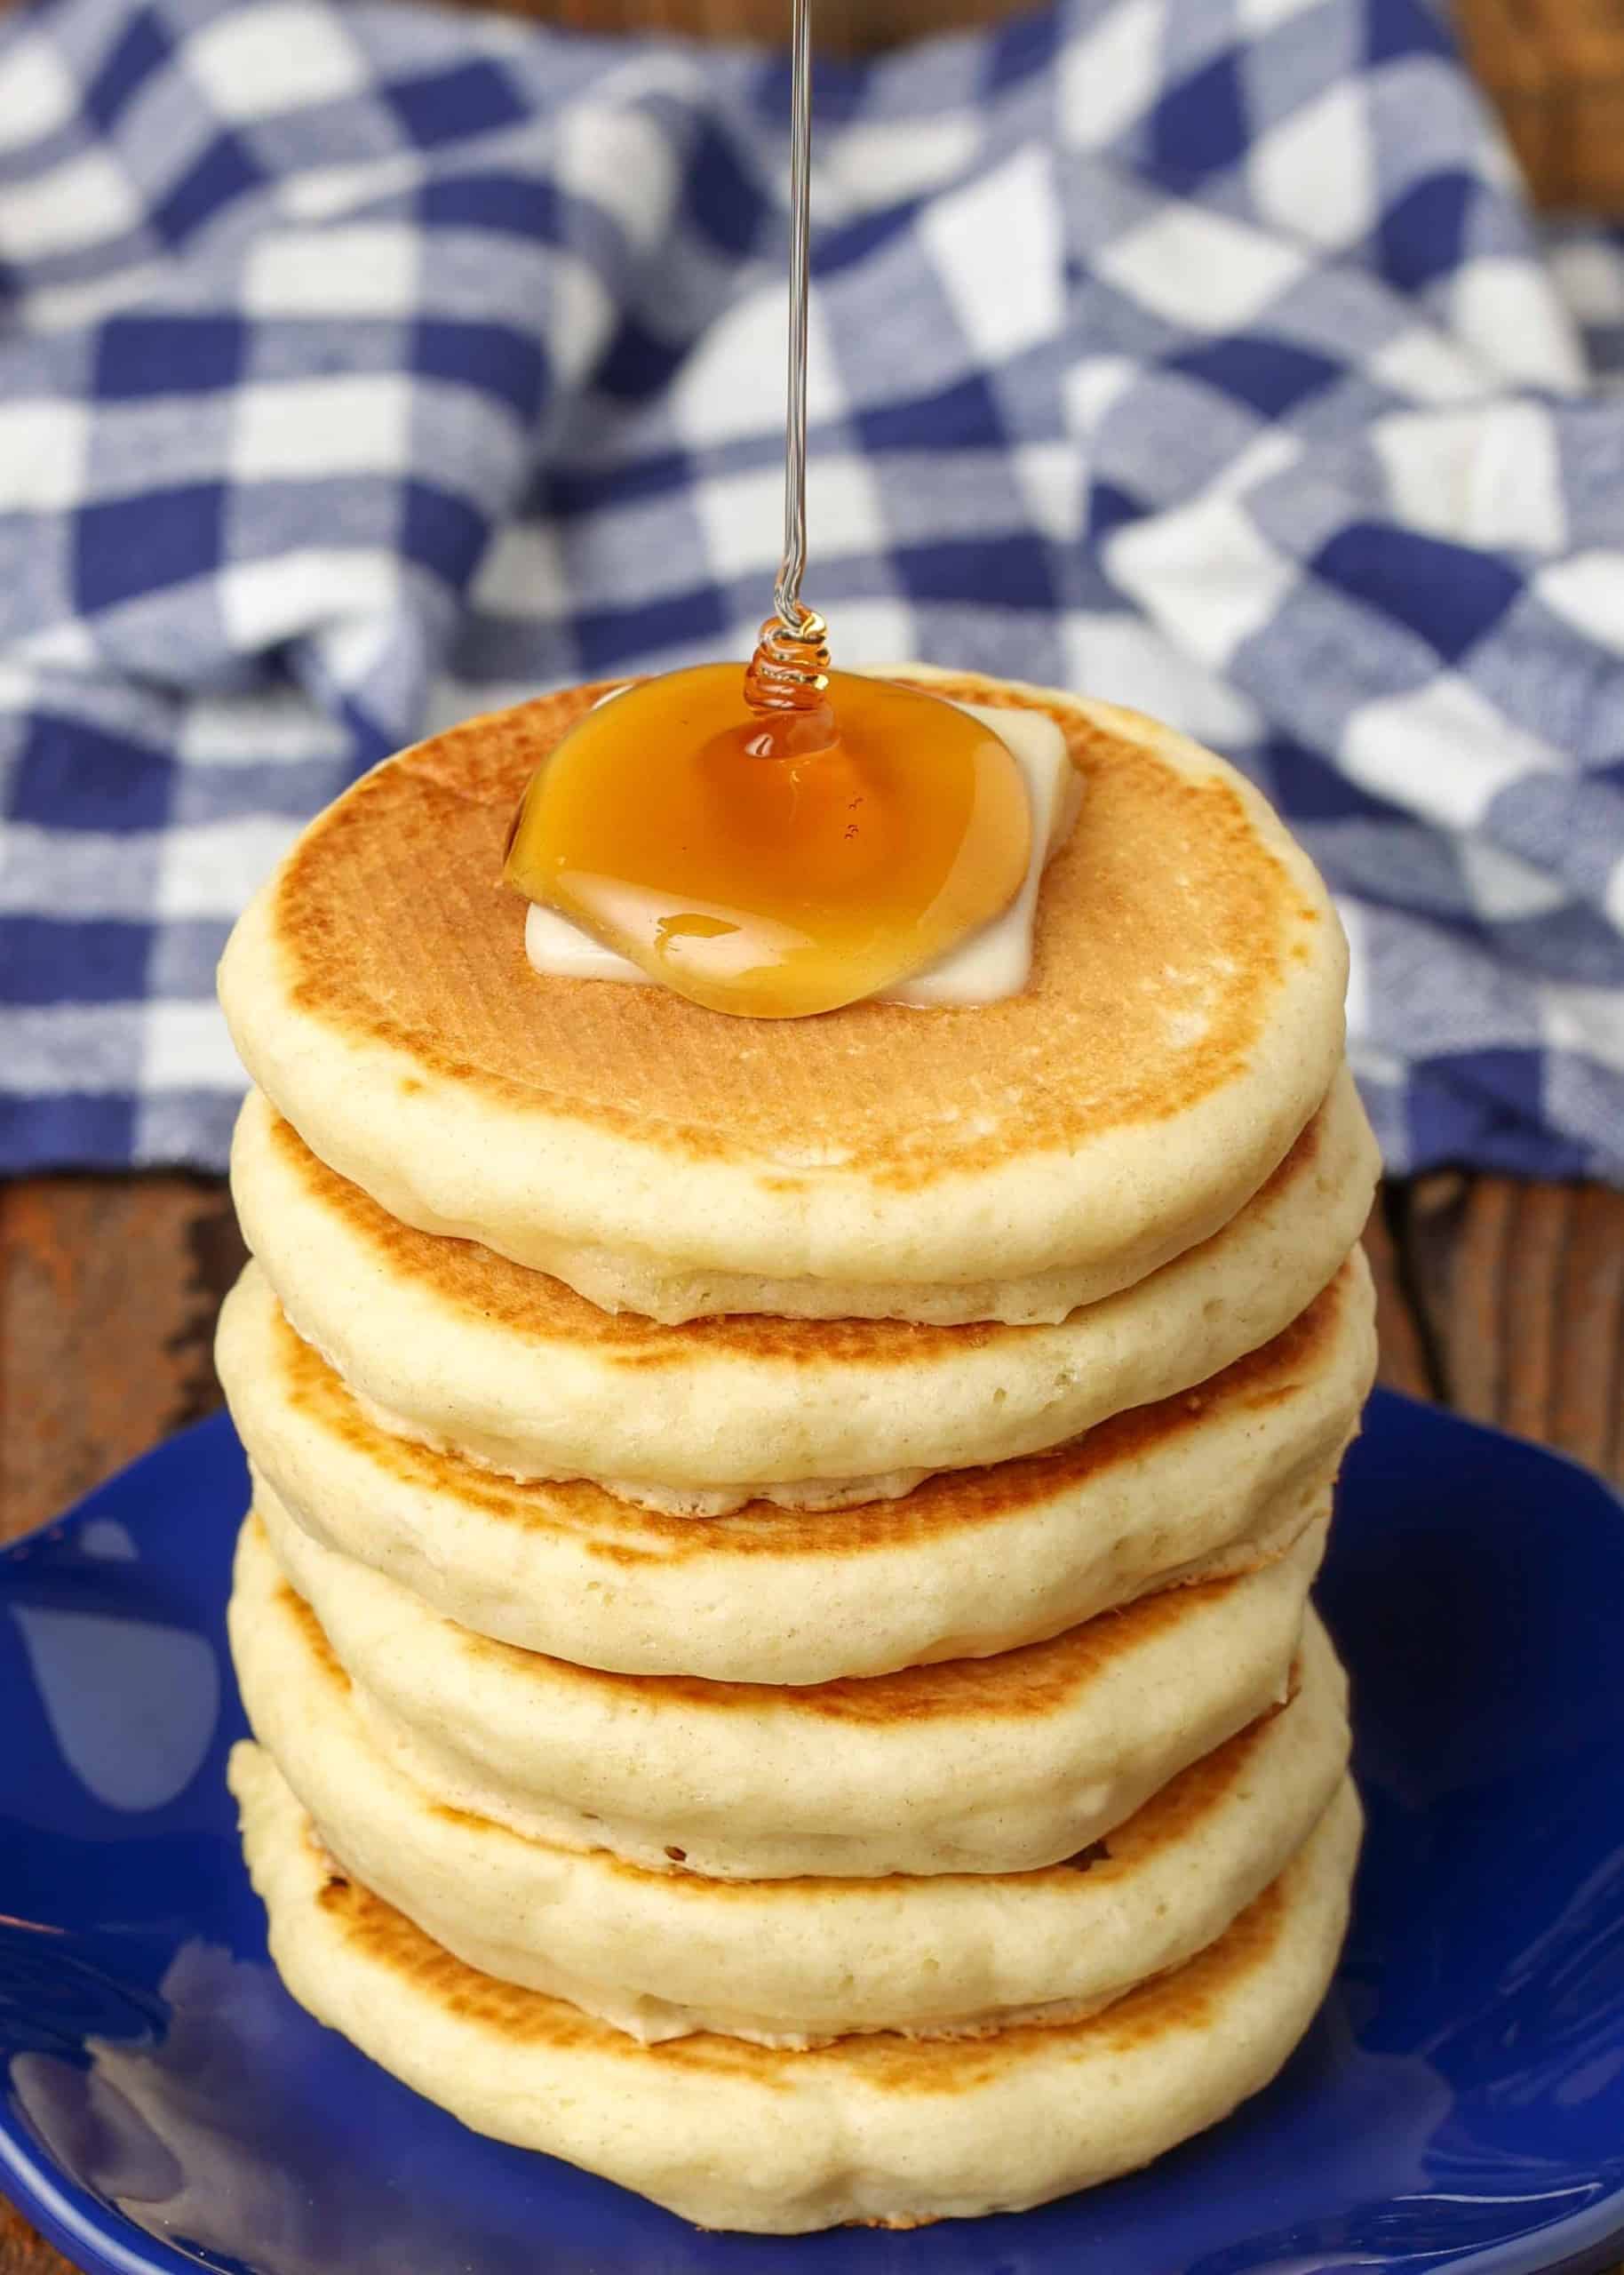 https://chocolatewithgrace.com/wp-content/uploads/2022/11/Silver-Dollar-Pancakes-CWG-6-1-of-1-scaled.jpg